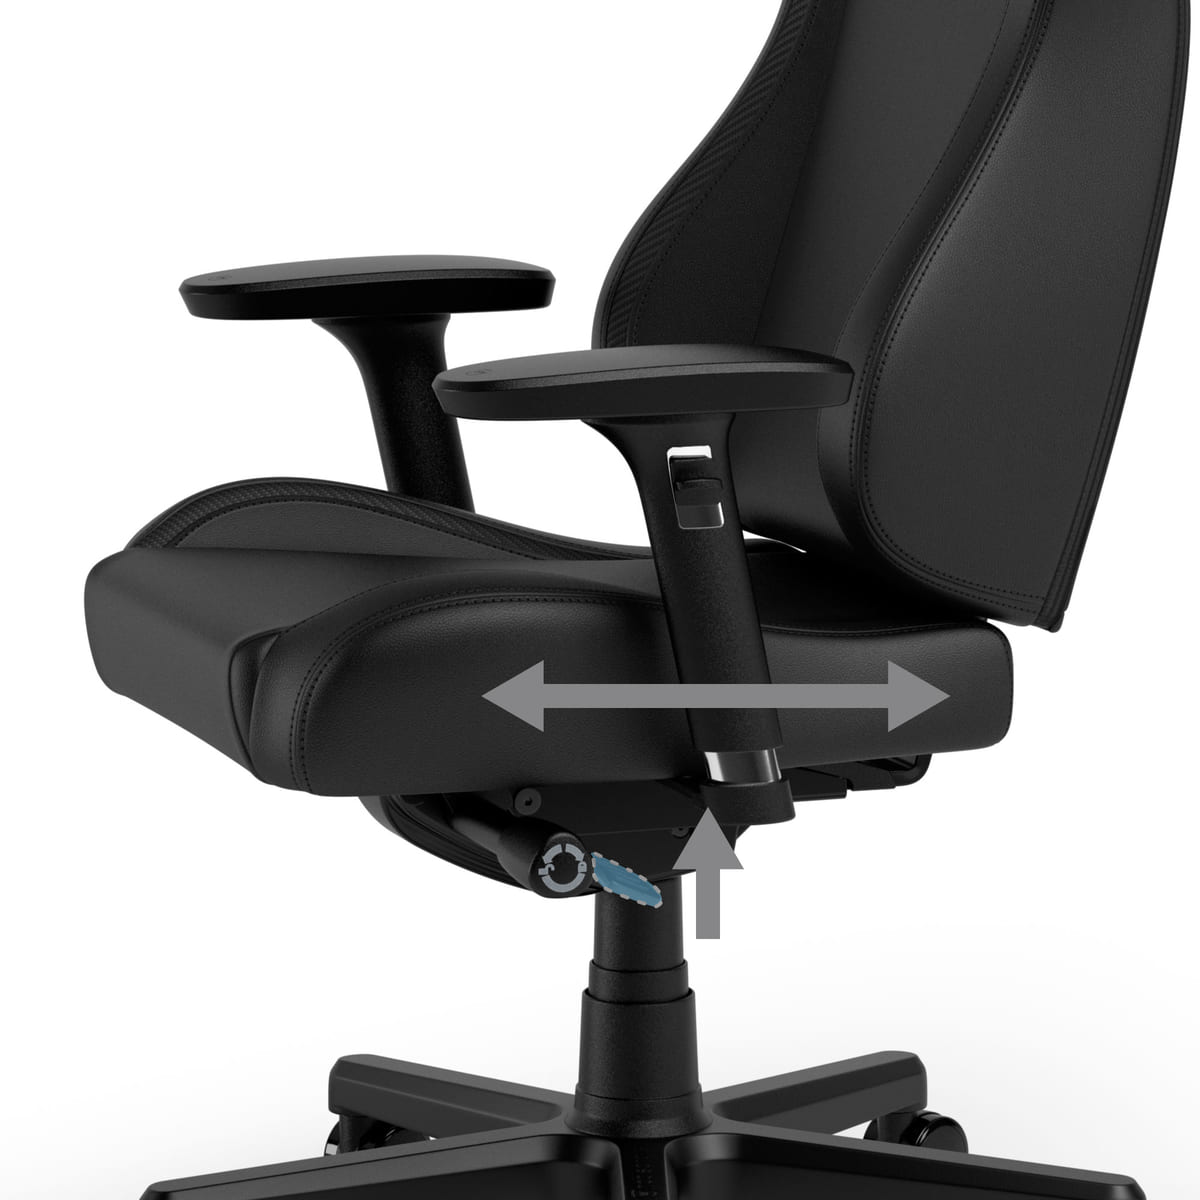 noblechairs(ノーブルチェアーズ)「EPIC COMPACT」９